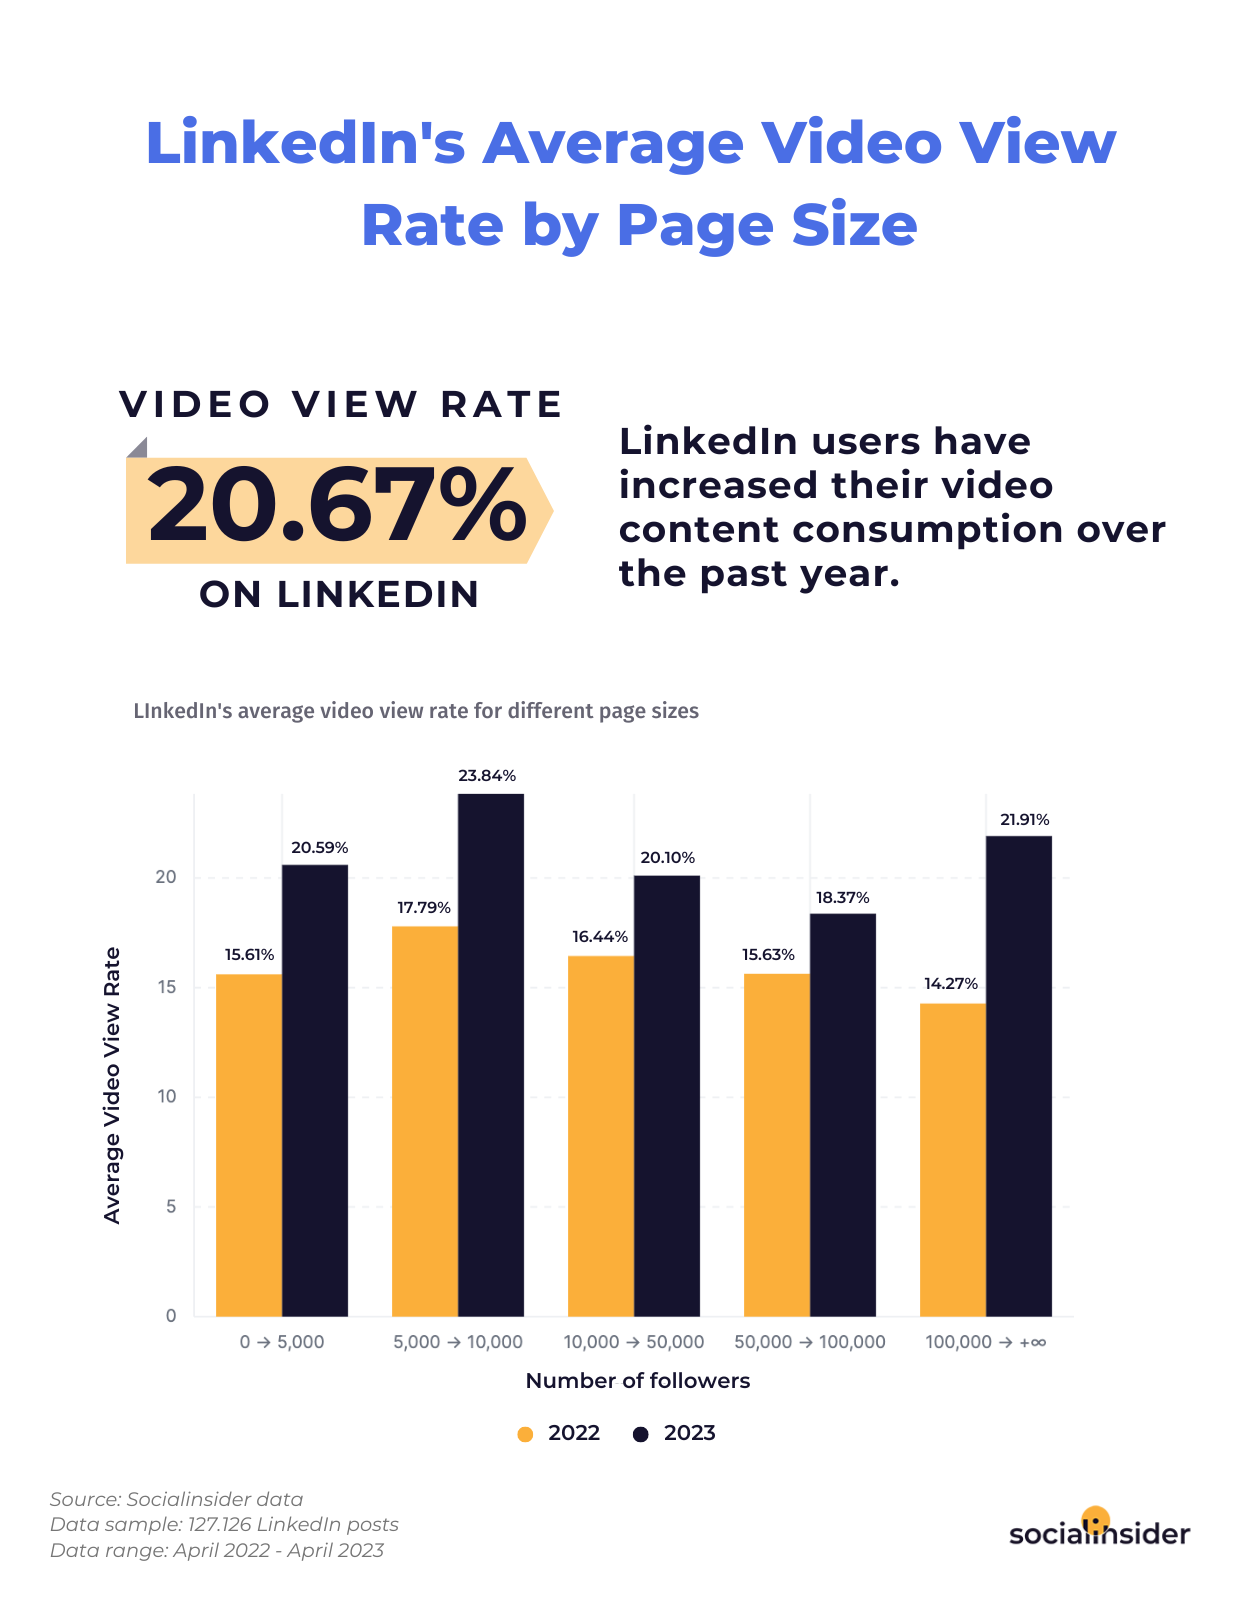 Here is a chart highlighting what's the average video view rate on LinkedIn.